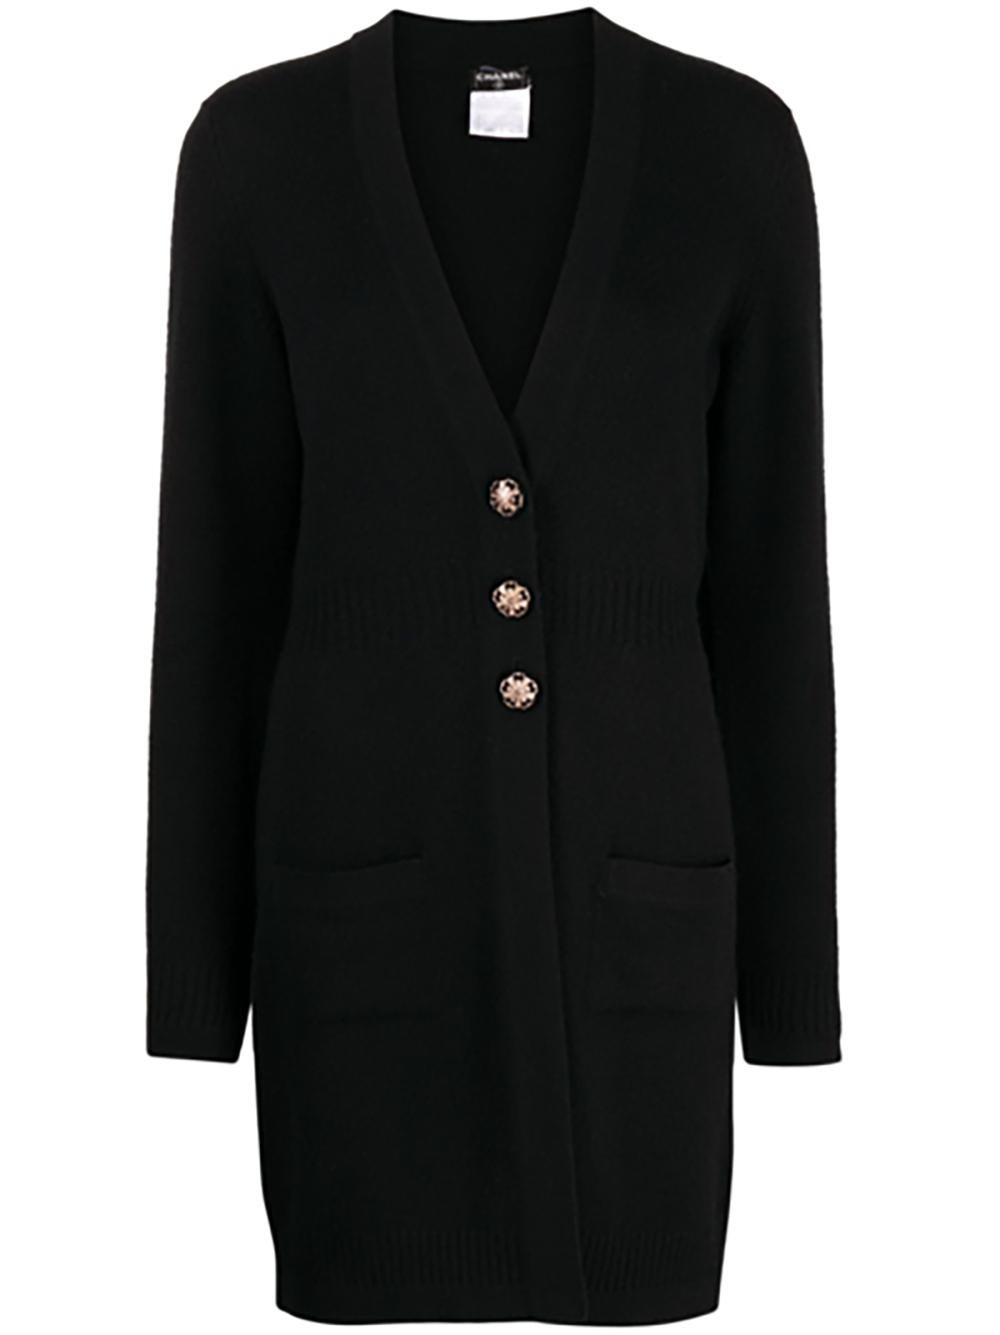 Black cashmere cardi coat Chanel with CC jewel gold-tone buttons.
Size mark 38 FR. Condition is pristine, no signs of wear.